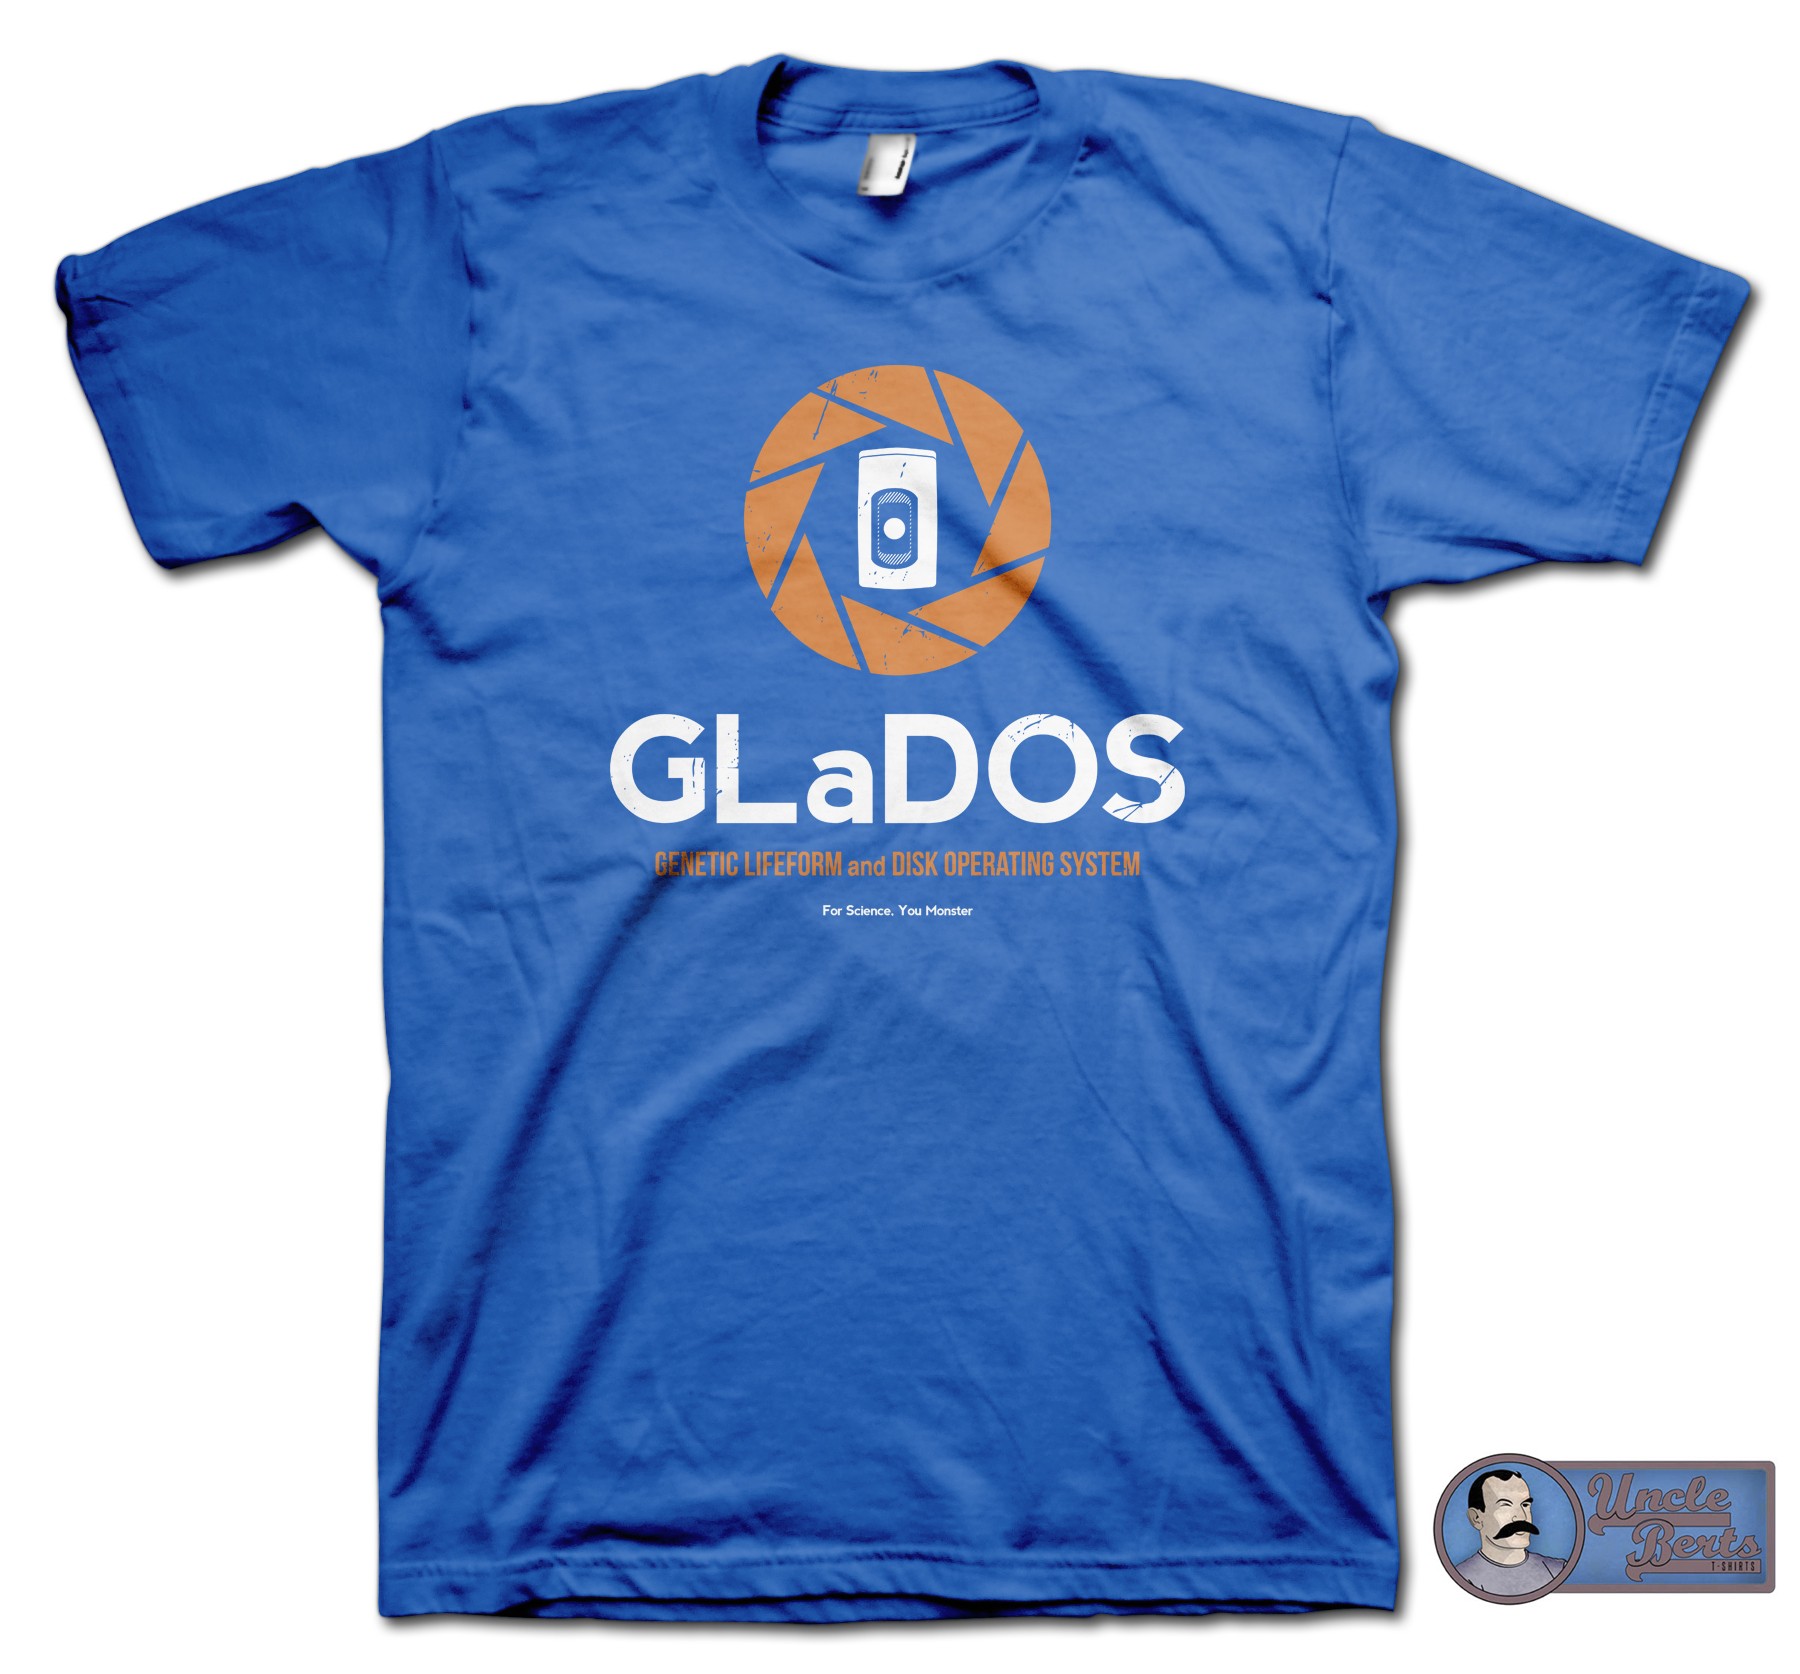 GLaDOS T-Shirt - inspired by the Portal series